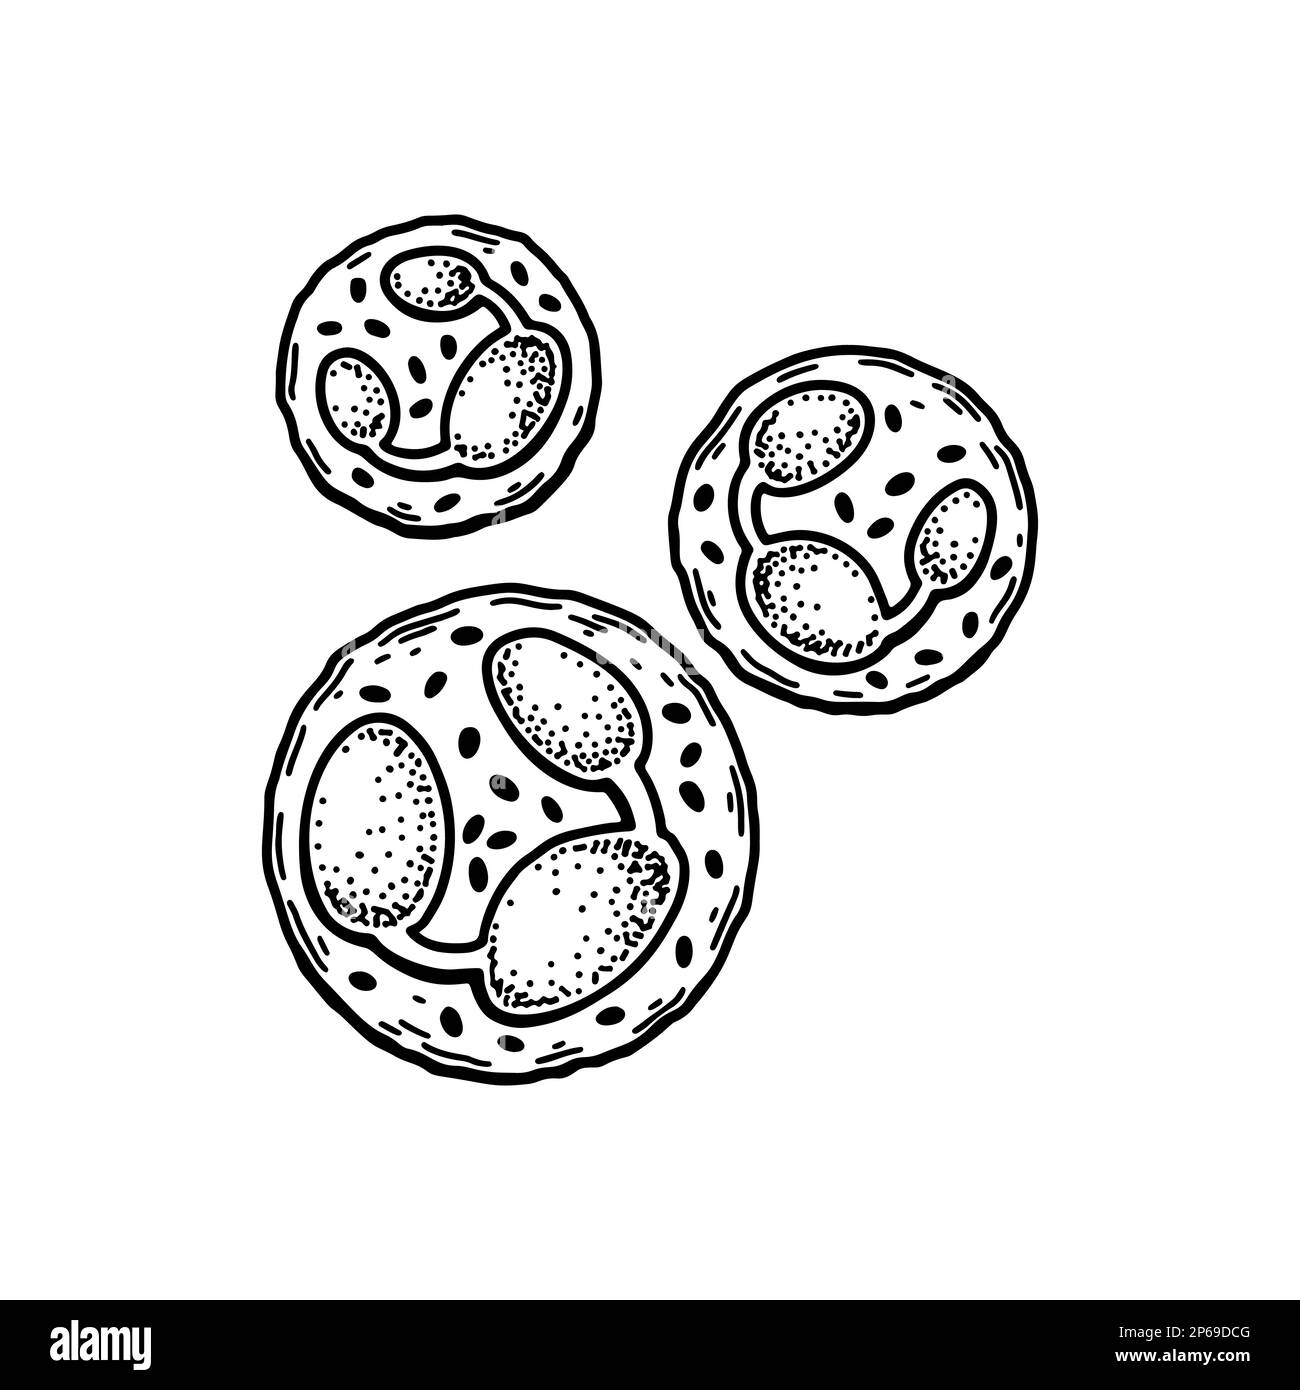 Neutrophil Leukocyte white blood cells isolated on white background. Hand drawn scientific microbiology vector illustration in sketch style Stock Vector